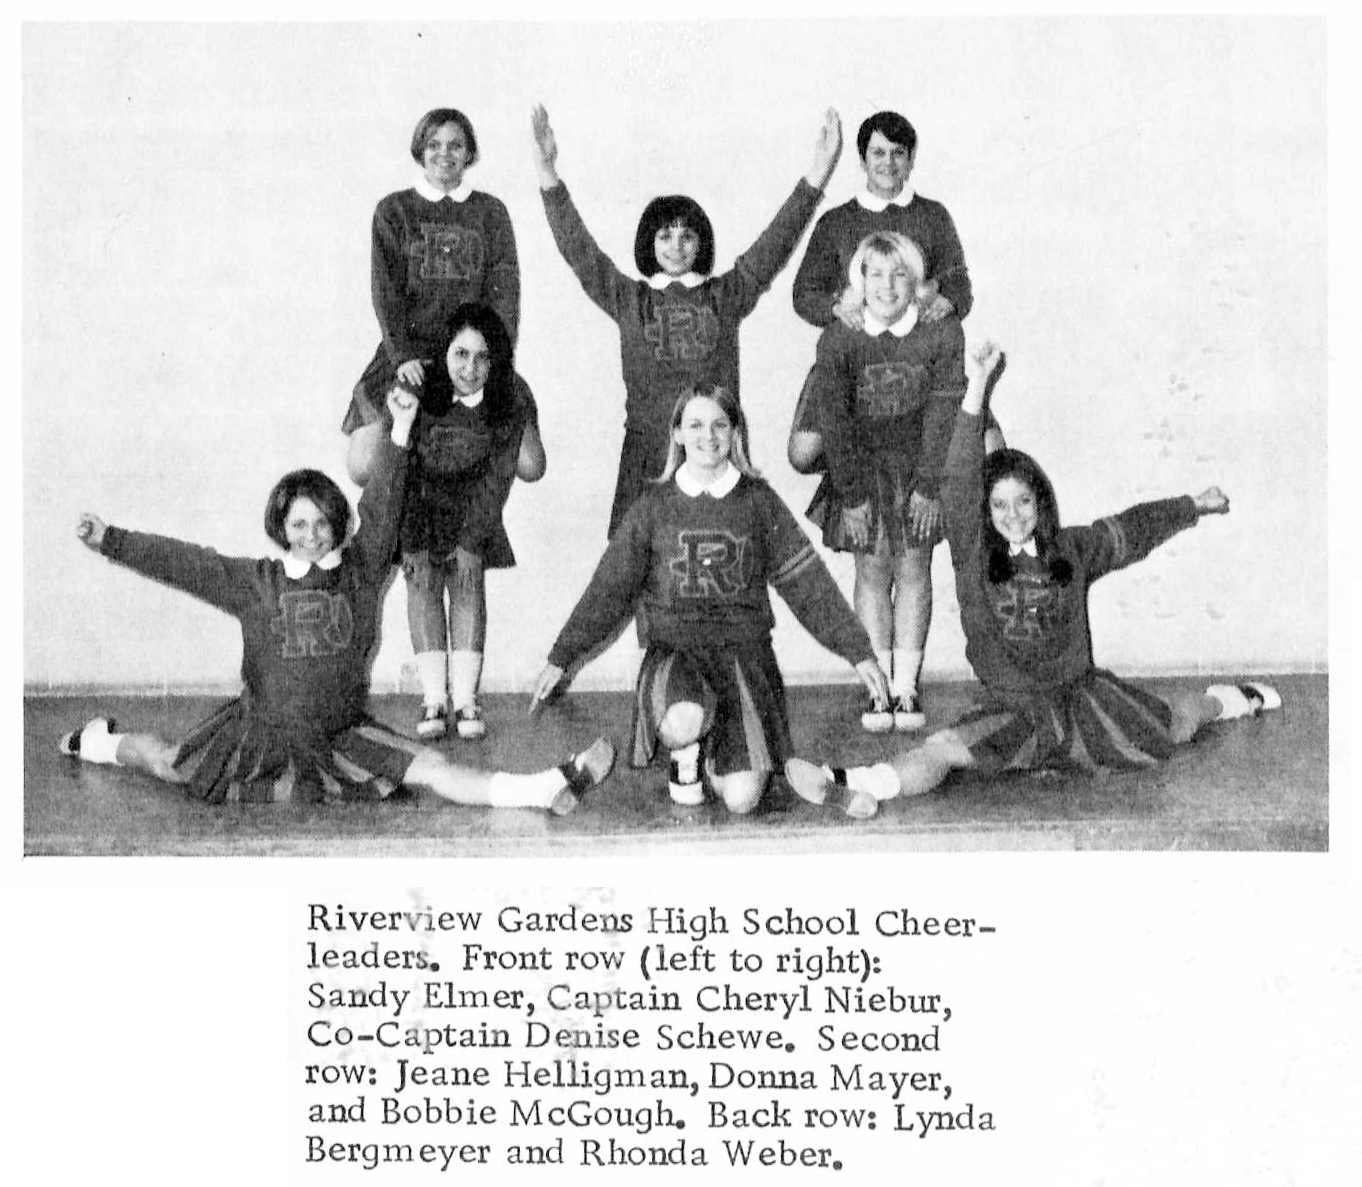 RGHS CHEERLEADING SQUAD featured in PROM MAGAZINE APRIL 1969. Class of 1969 Cheerleaders are Sandy Elmer, Linda Bergmeyer, Cheryl Niebur (Captain) and Denise Schewe (Co-Captain).